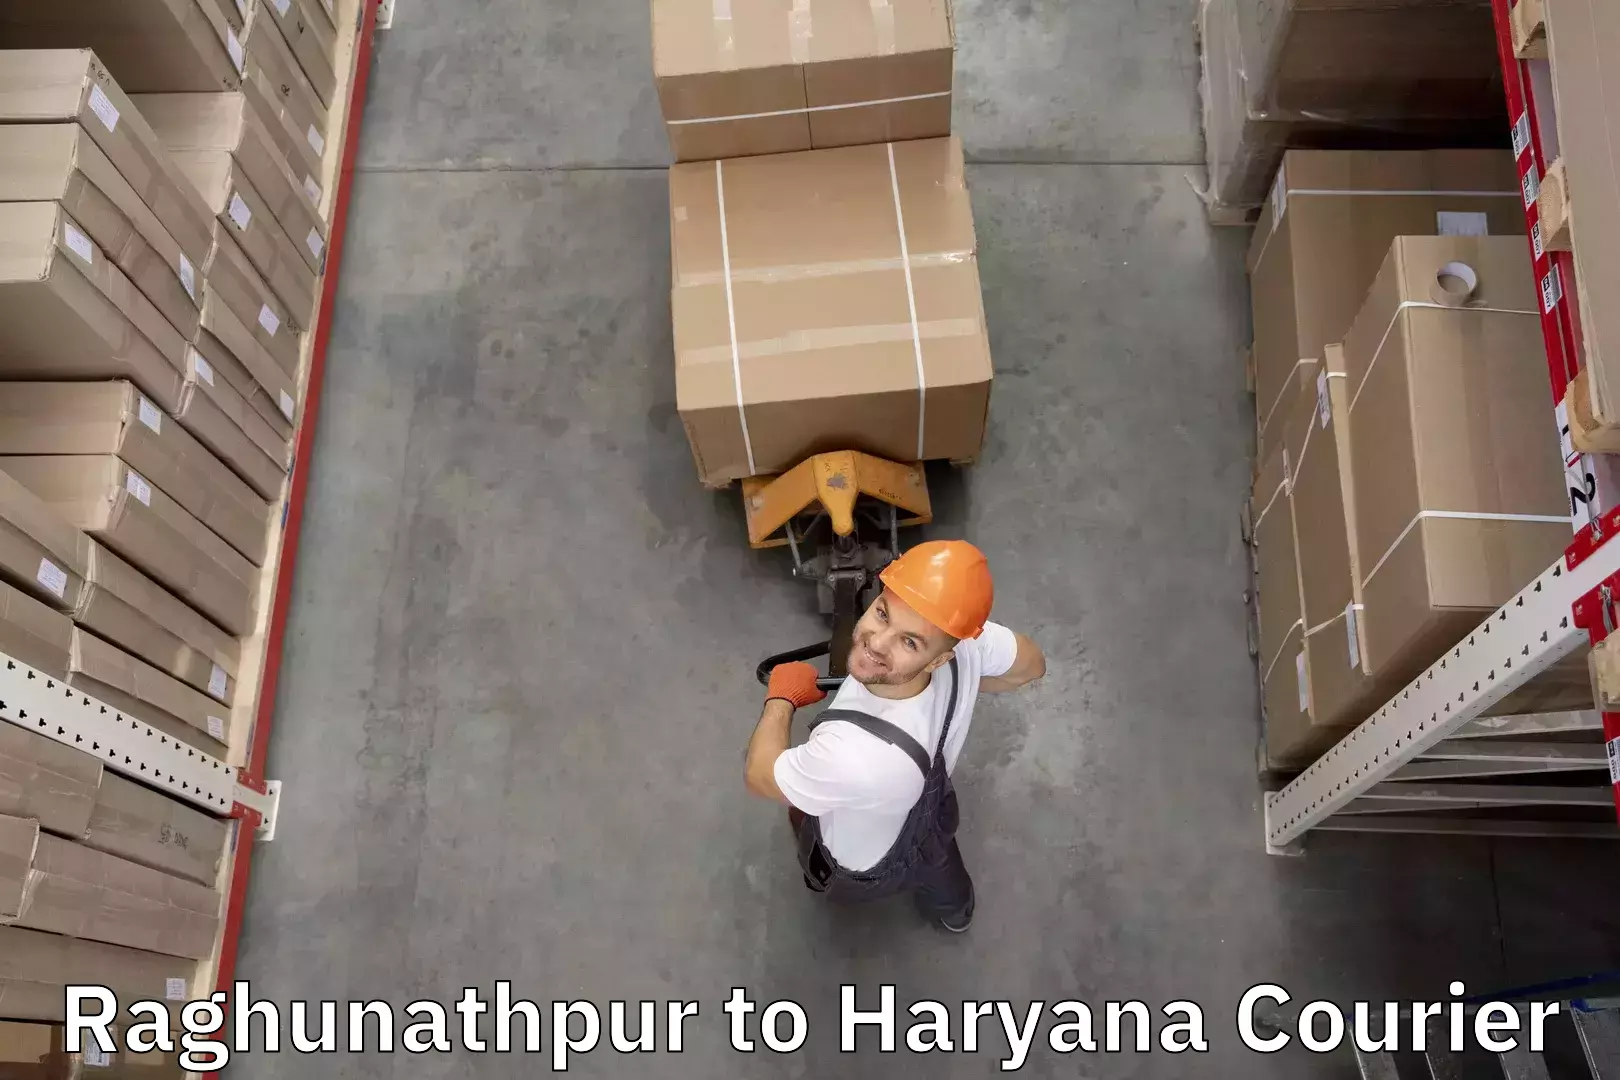 Luggage shipping specialists Raghunathpur to Chaudhary Charan Singh Haryana Agricultural University Hisar